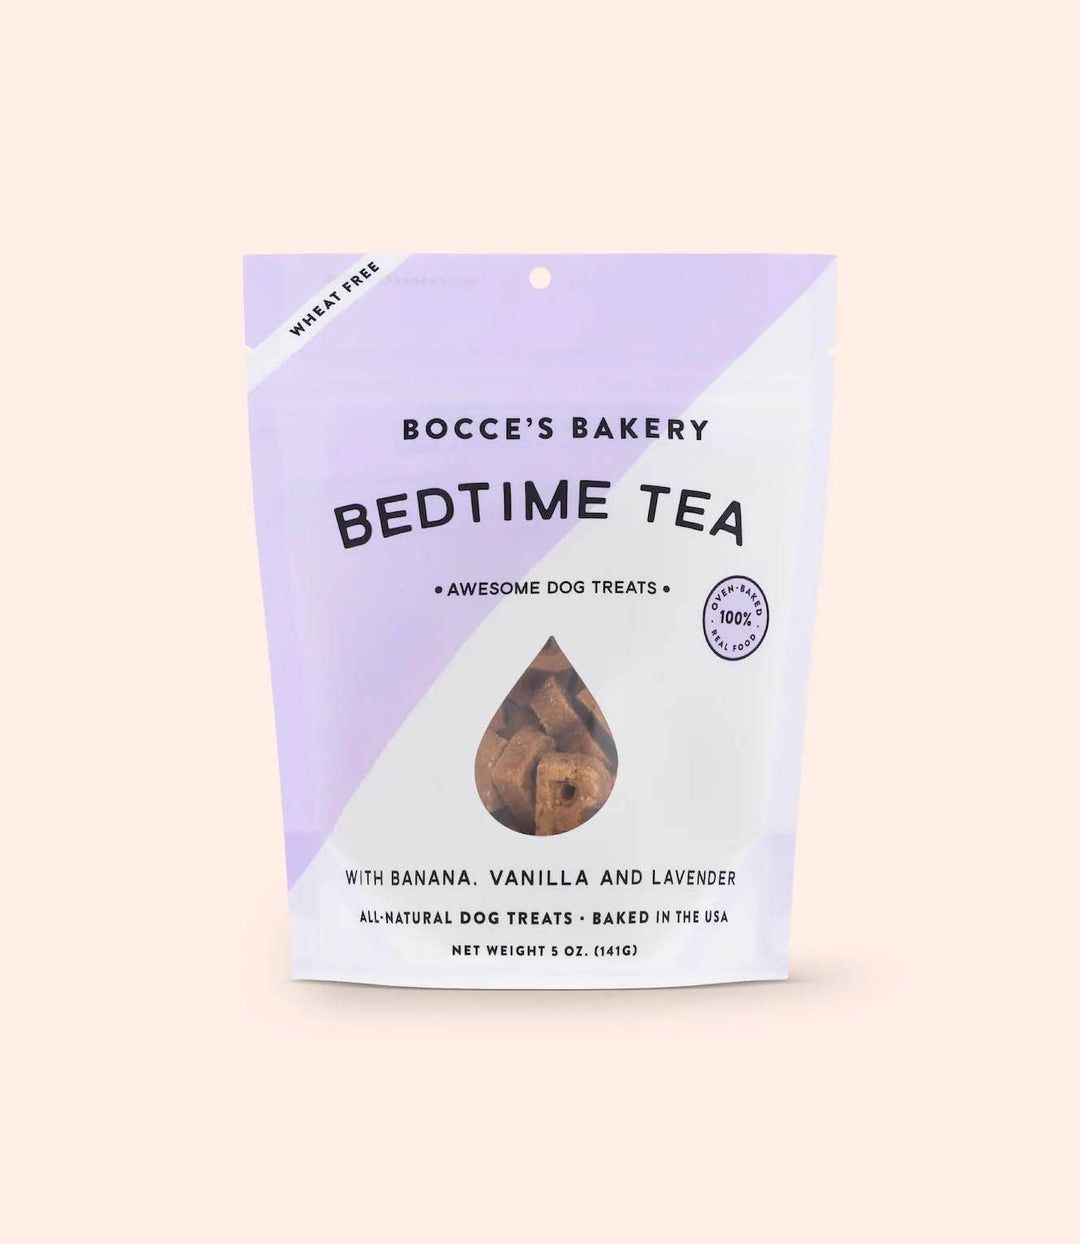 Bocce's Bakery Bedtime Tea 5oz Biscuits Dog Treats